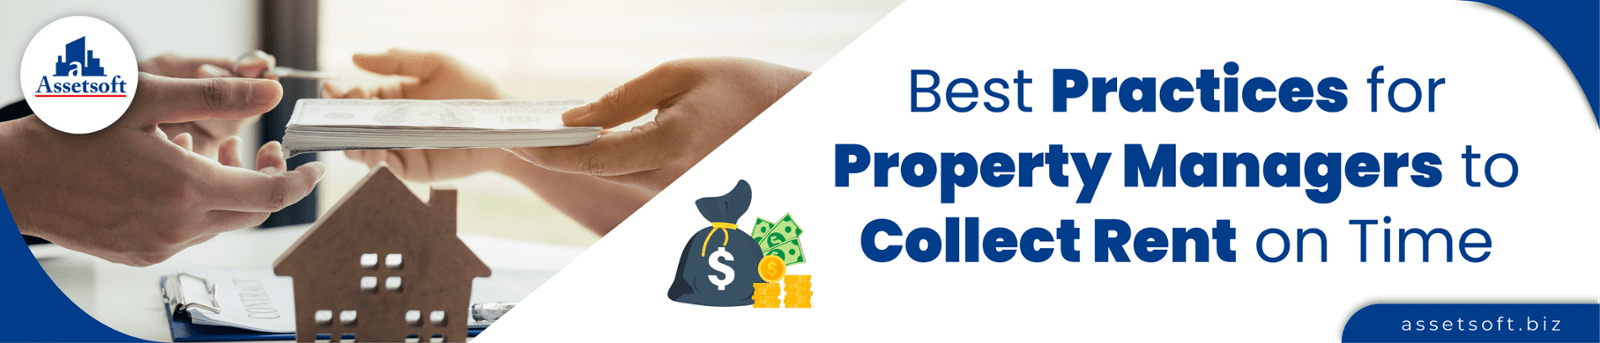 Best Practices for Property Managers to Collect Rent on Time 